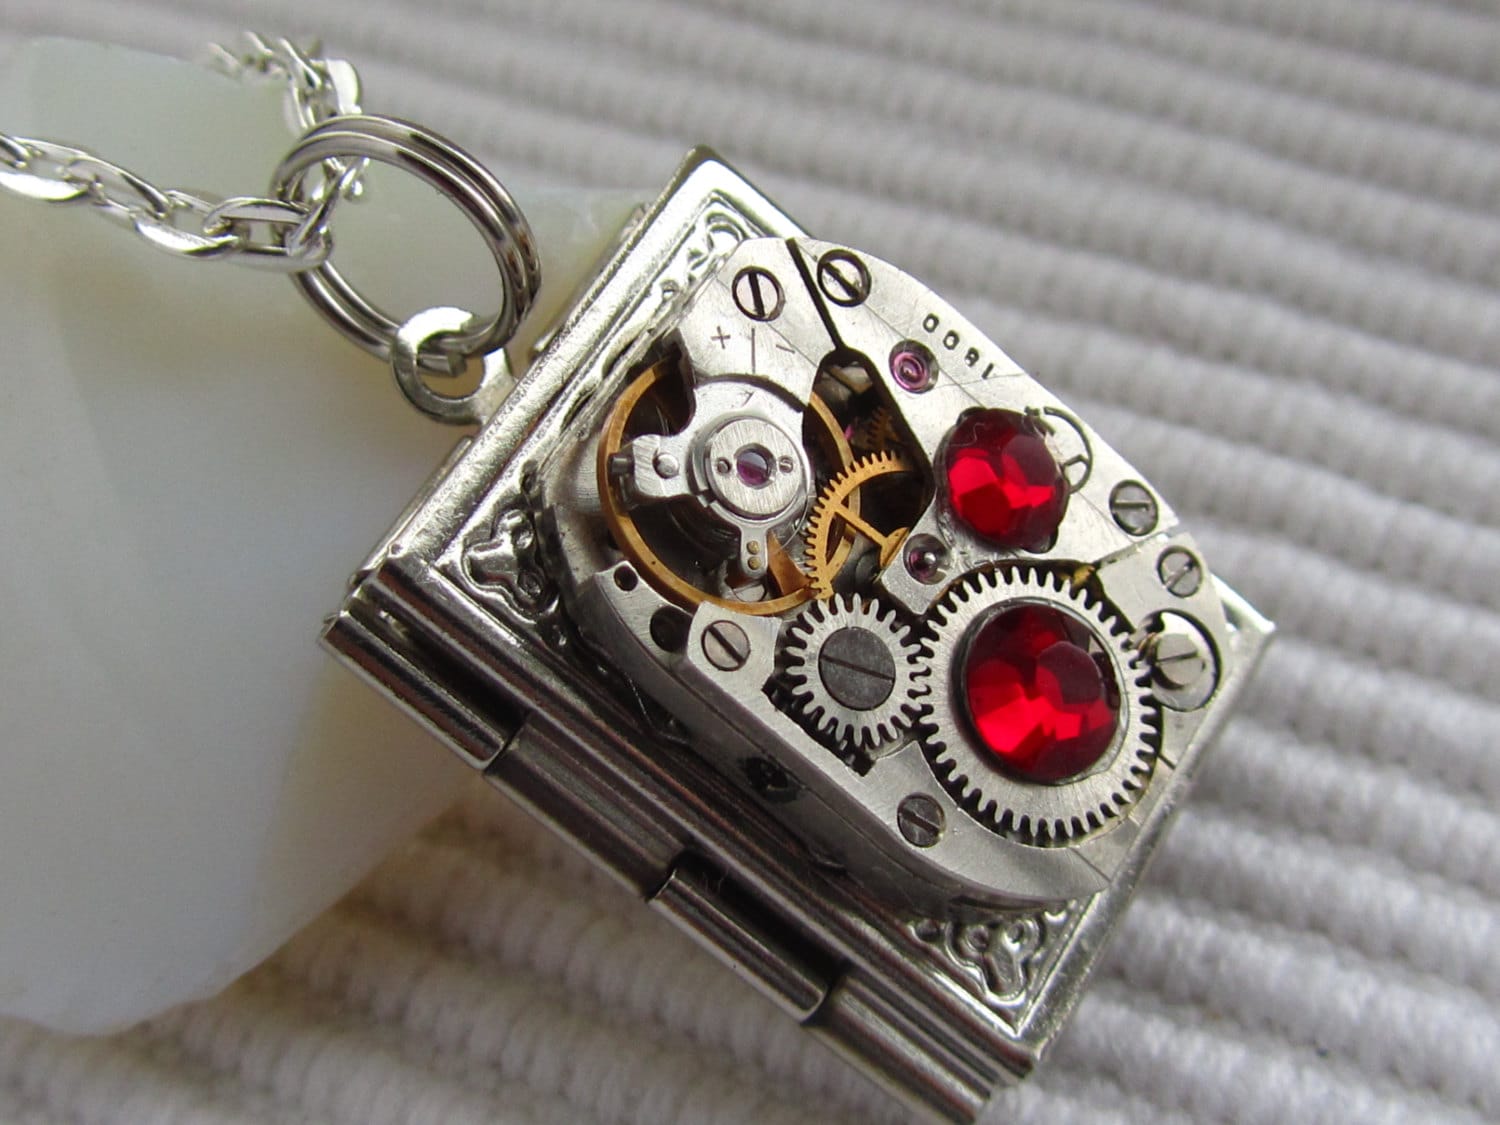 Steampunk book locket necklace with vintage watch  movement and  Ruby Red  Swarovski crystals